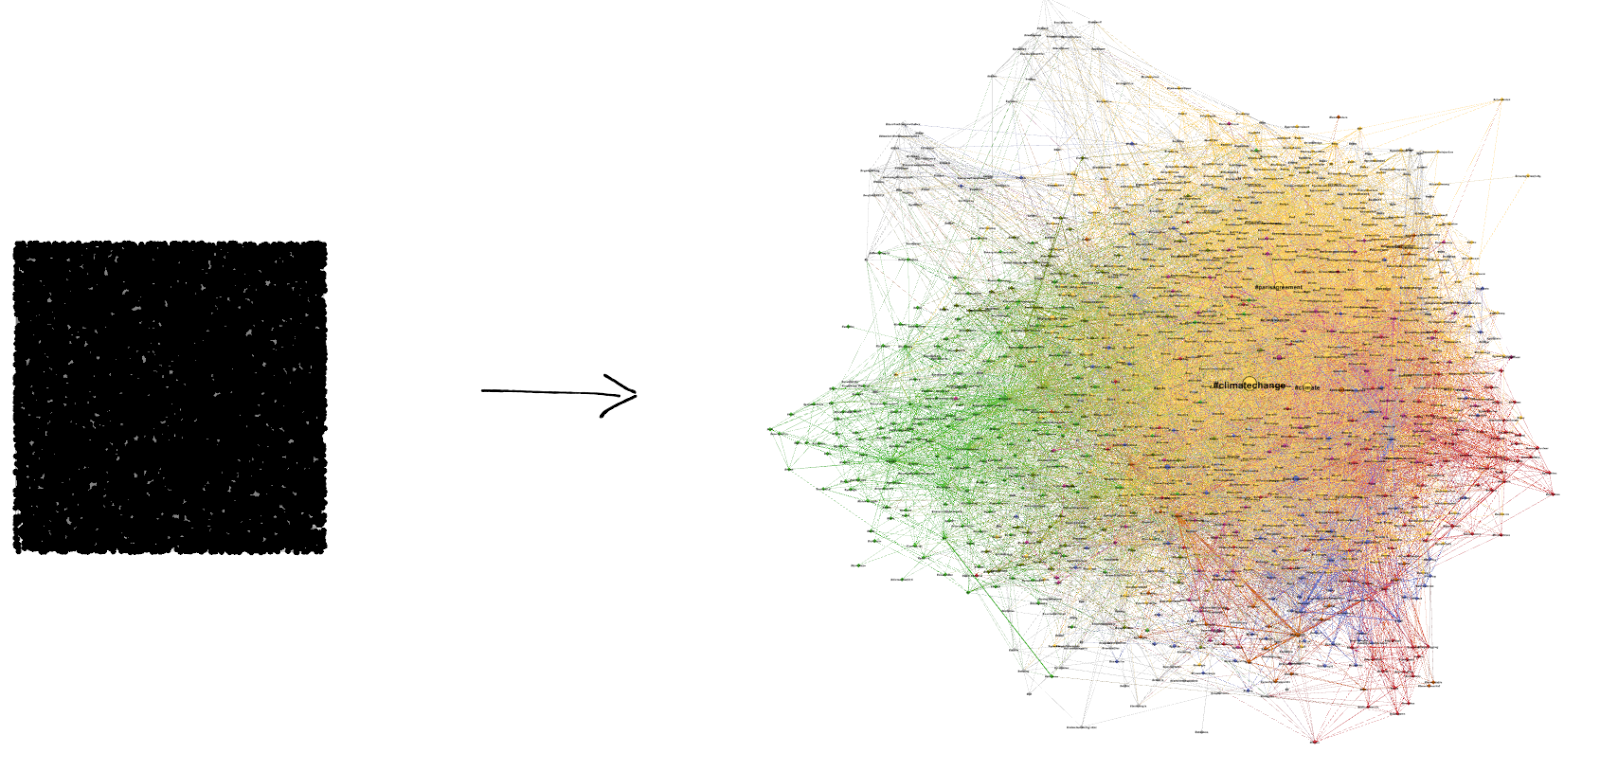 Figure 1: Participants will learn how to produce a readable Gephi map